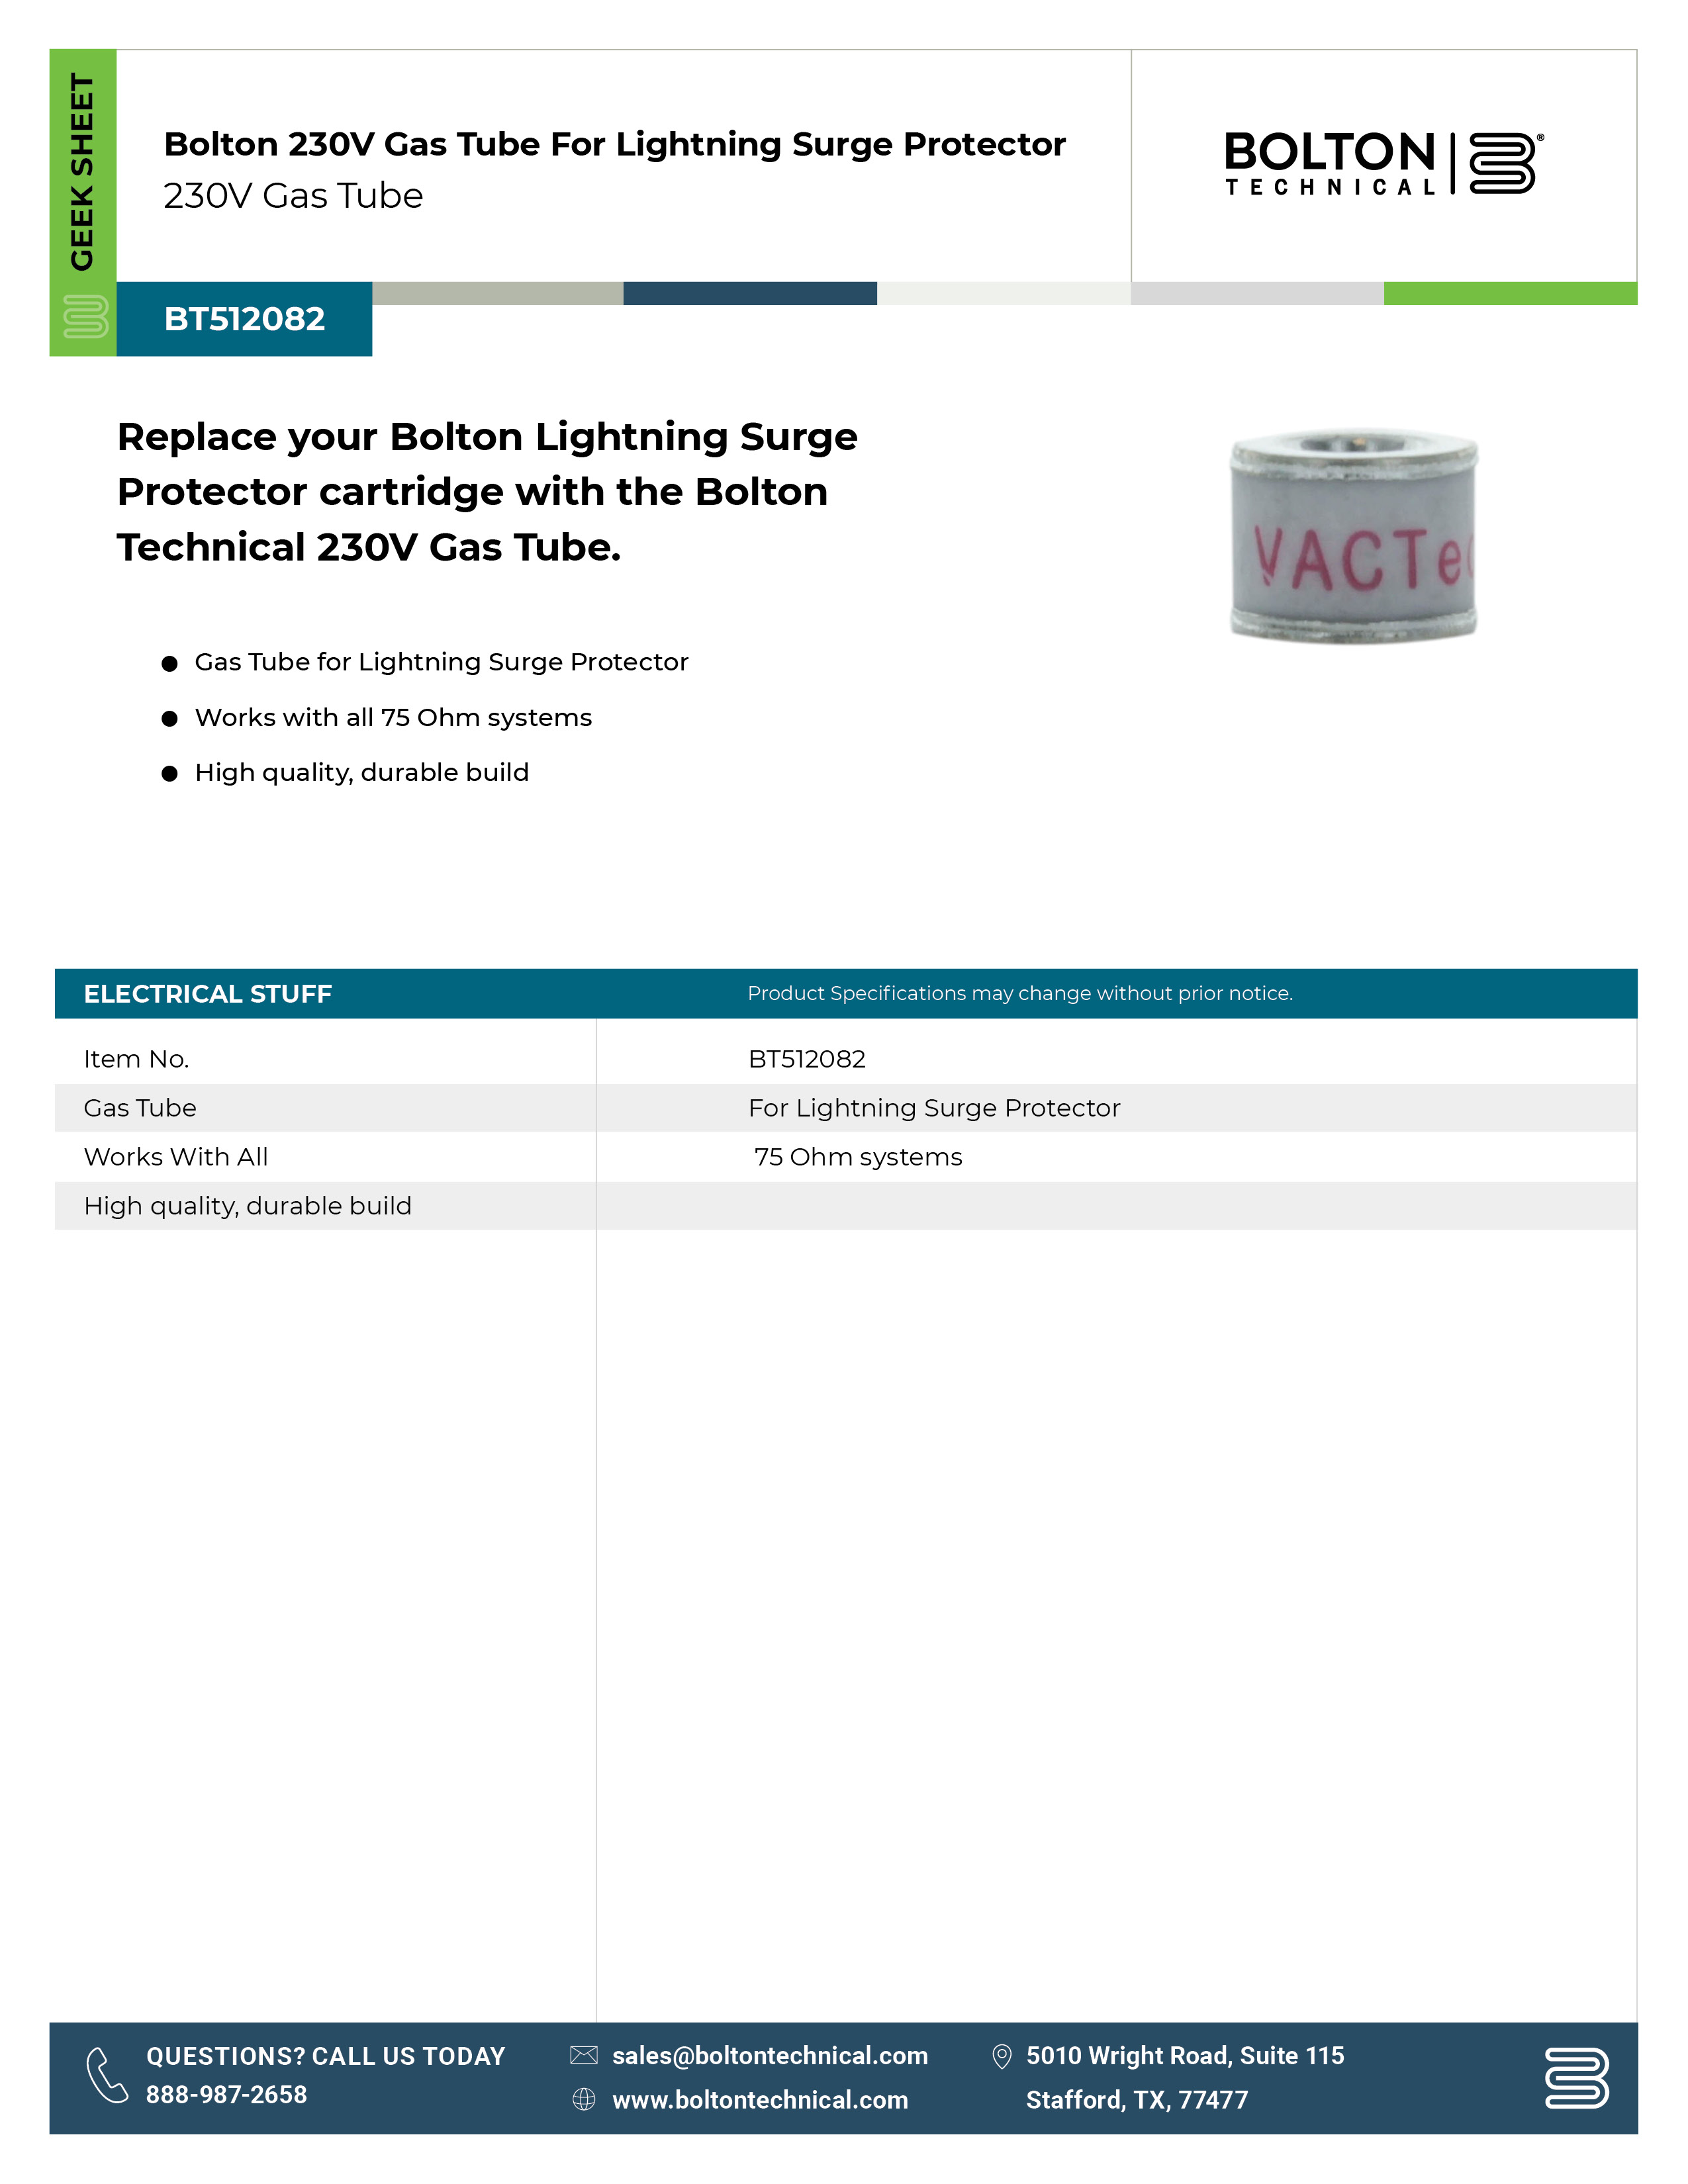 gas tube for lightning surge protector spec sheet